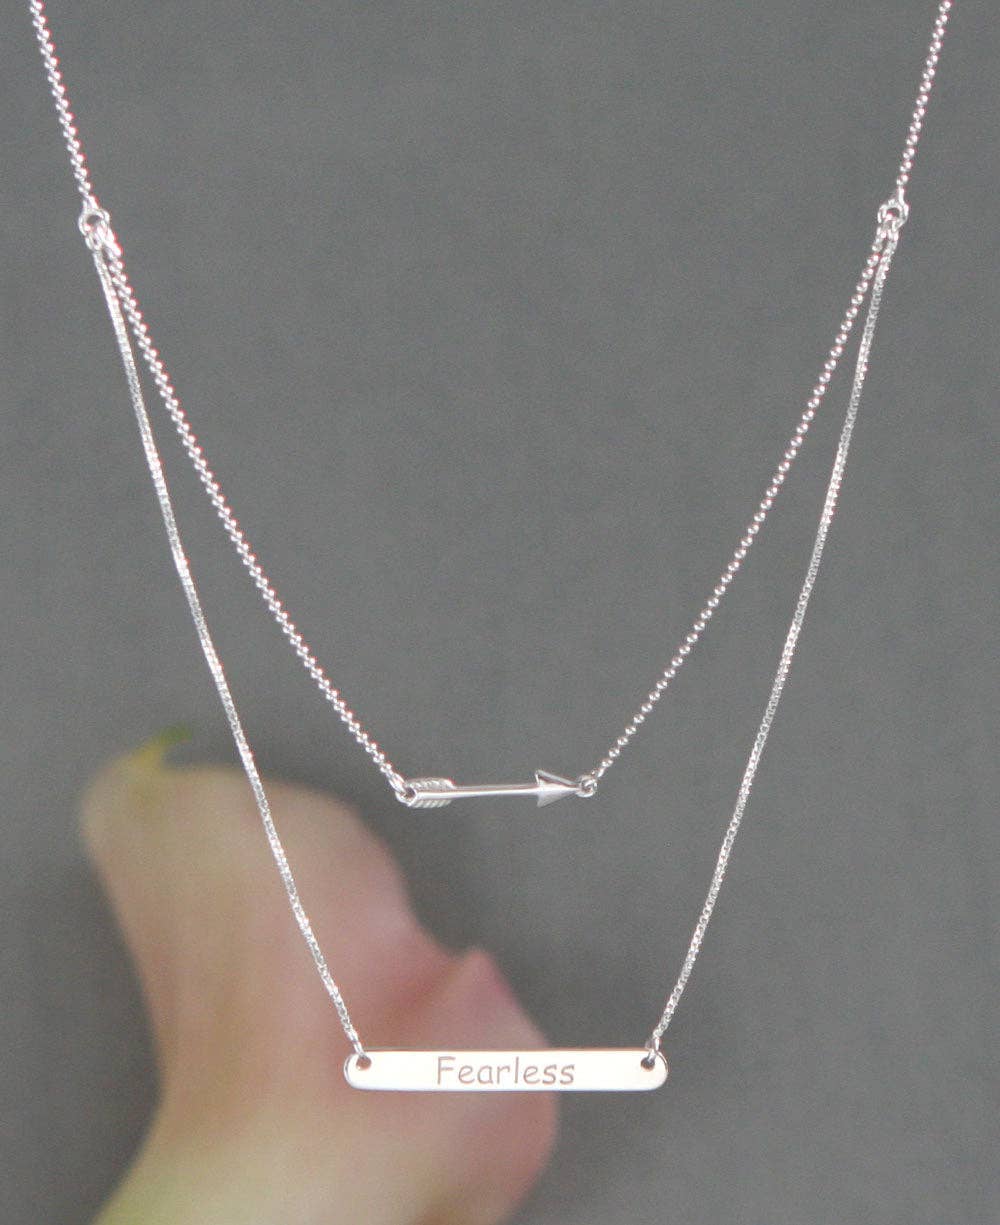 Culture Spot - Inspirational Sterling Silver Layer Necklace, Fearless